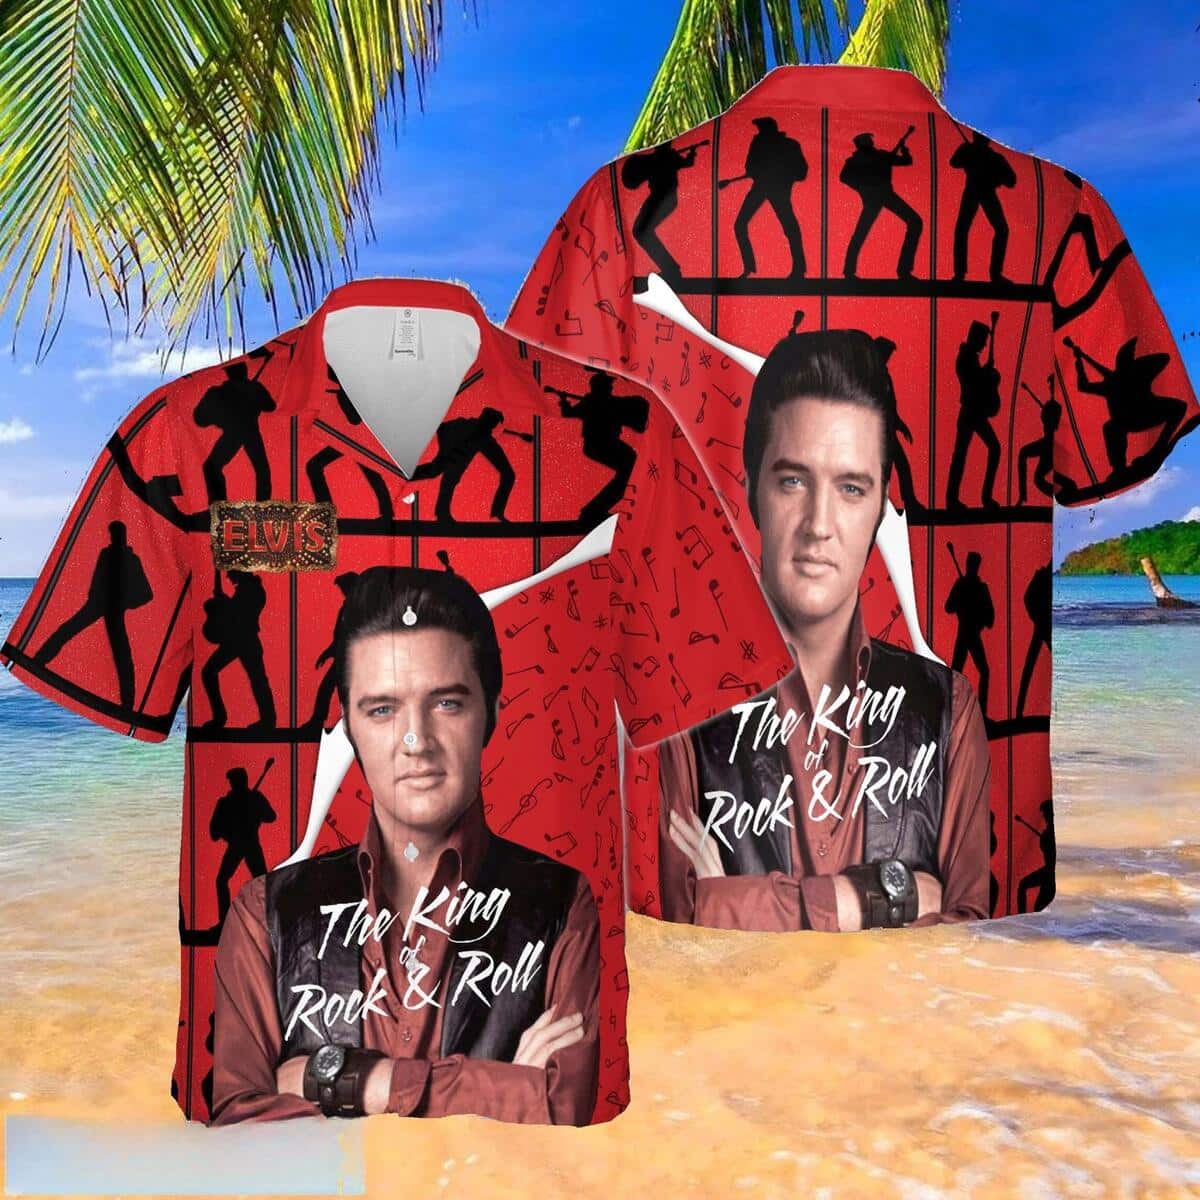 The King Rock And Roll Elvis Presley Hawaiian Shirt Beach Gift For Music Fans